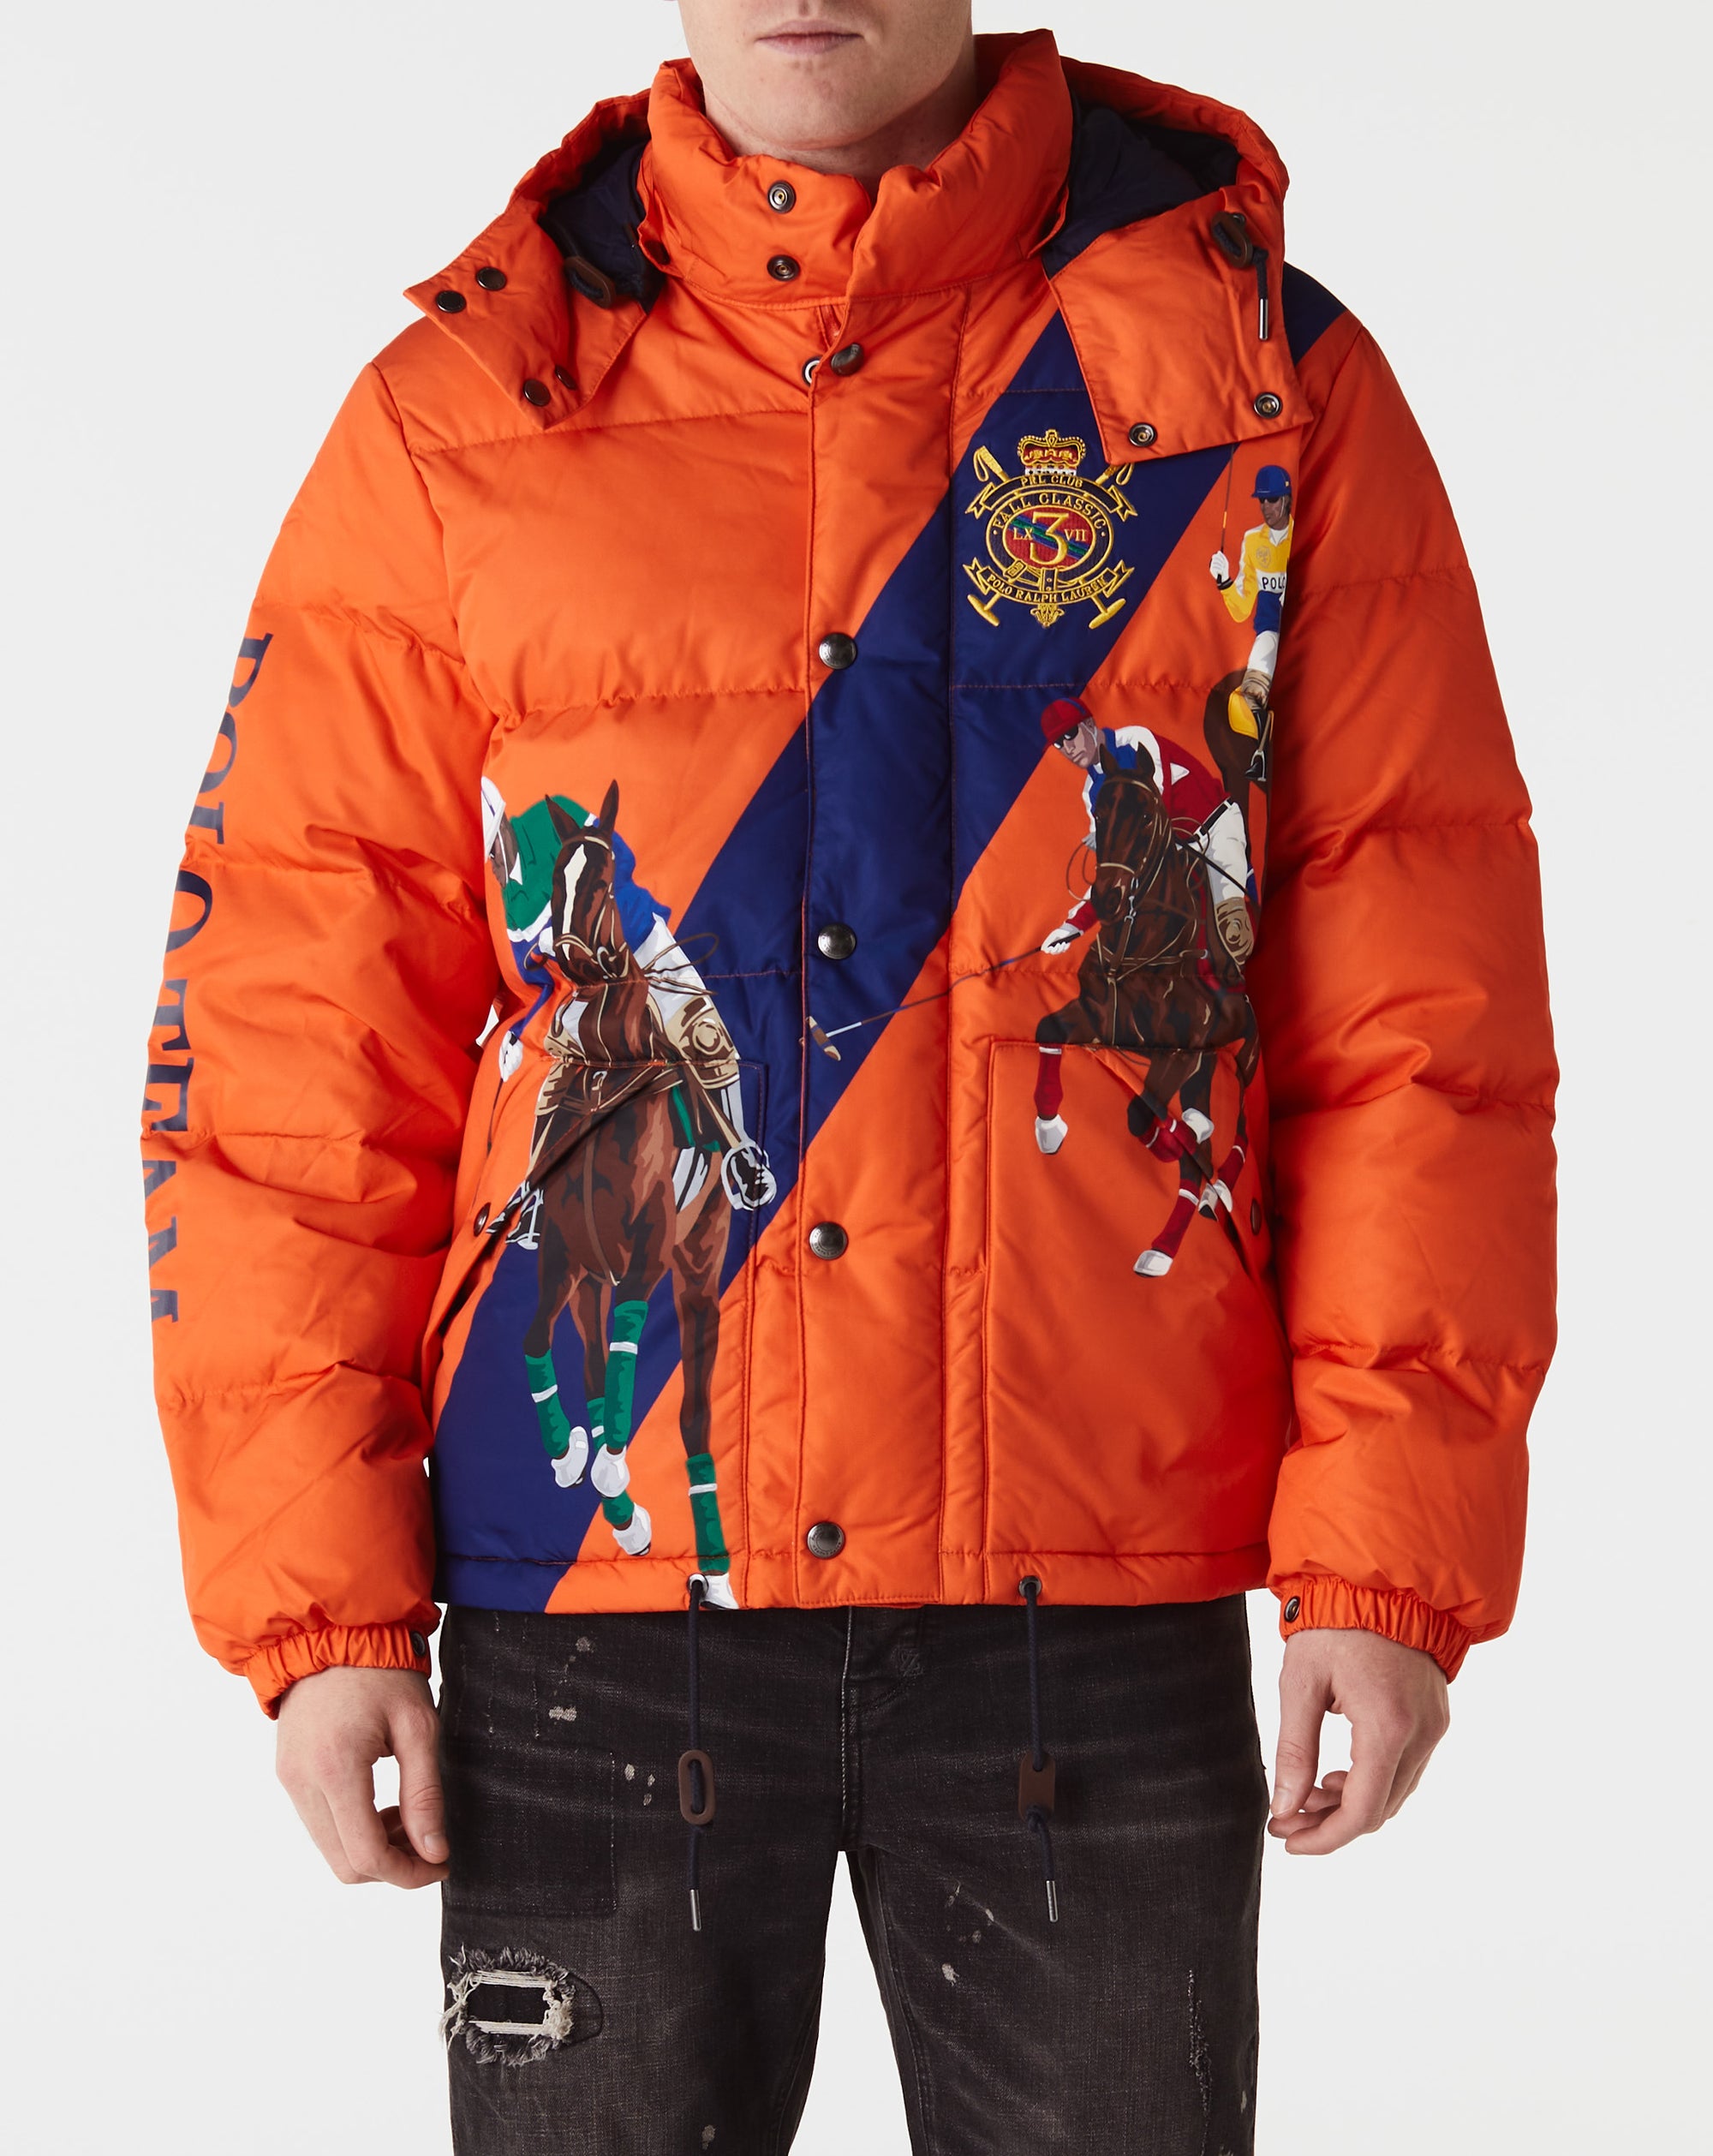 Polo Ralph Lauren Equestrian Bomber Jacket - Rule of Next Apparel